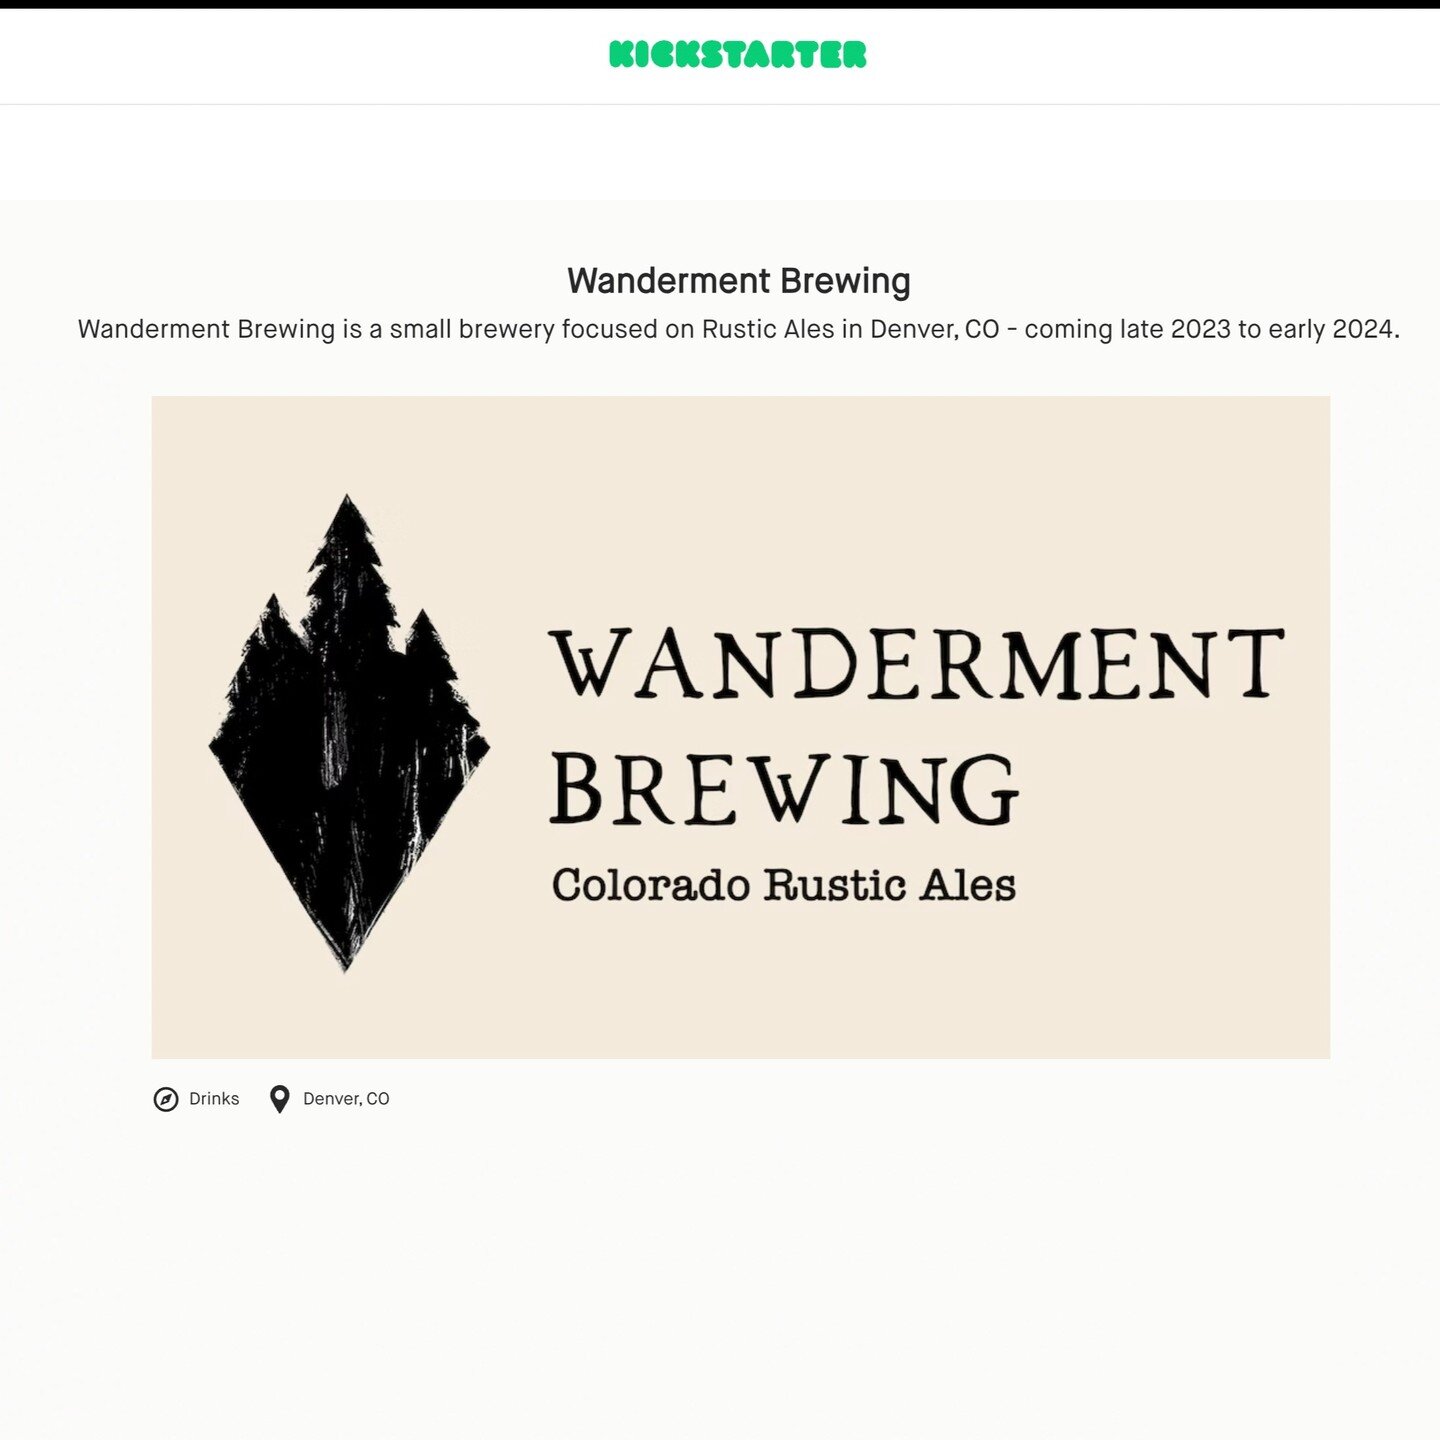 We have just launched our Kickstarter to help raise money and make our dream of bringing Wanderment Brewing into the world a reality. Feel free to contribute any amount that you are comfortable with and of course no pressure. Any amount is truly appr